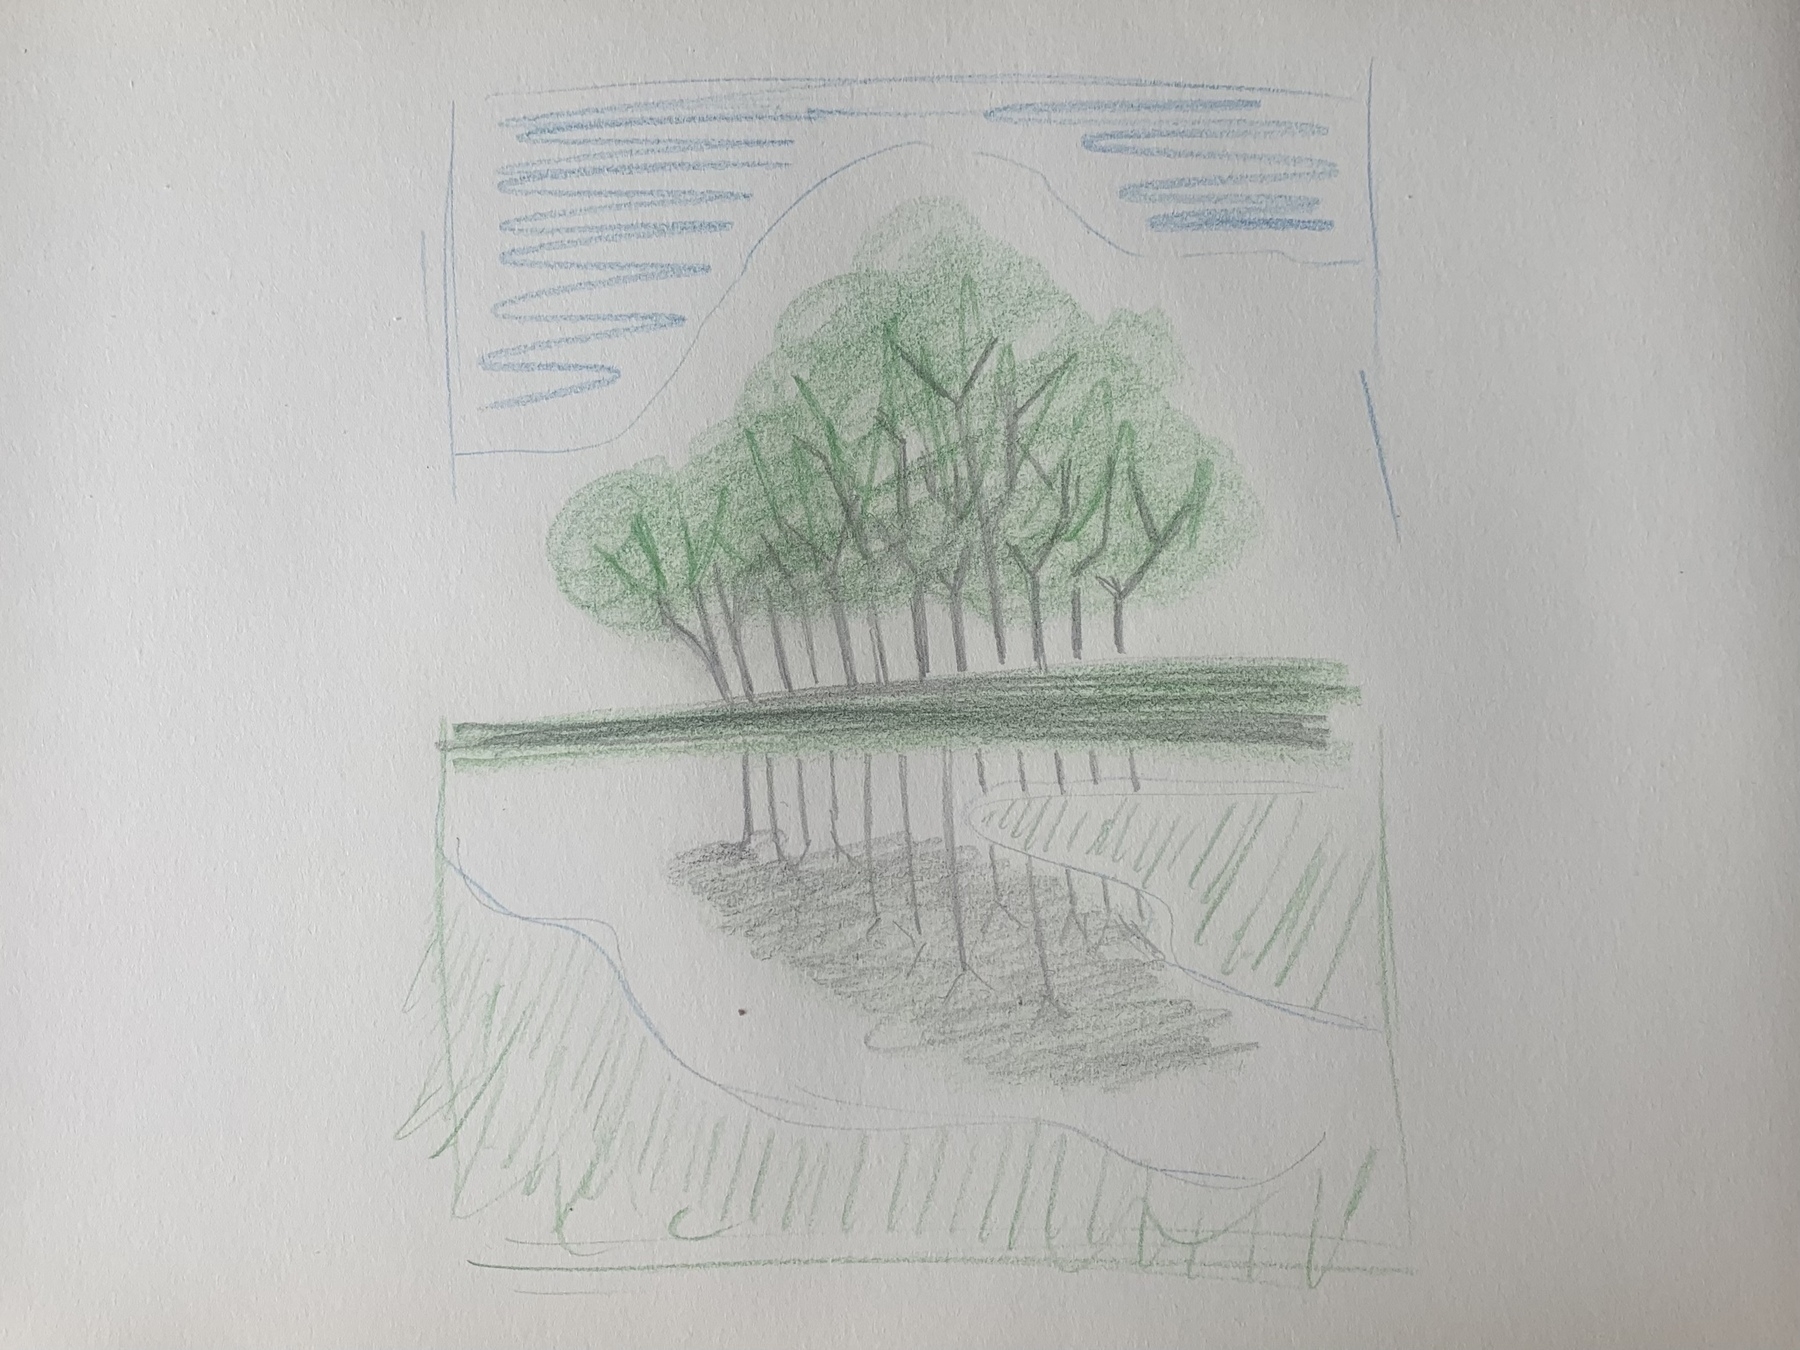 Coloured pencil sketch on paper. A stand of trees against a blue sky is reflected in a large puddle covering a field.